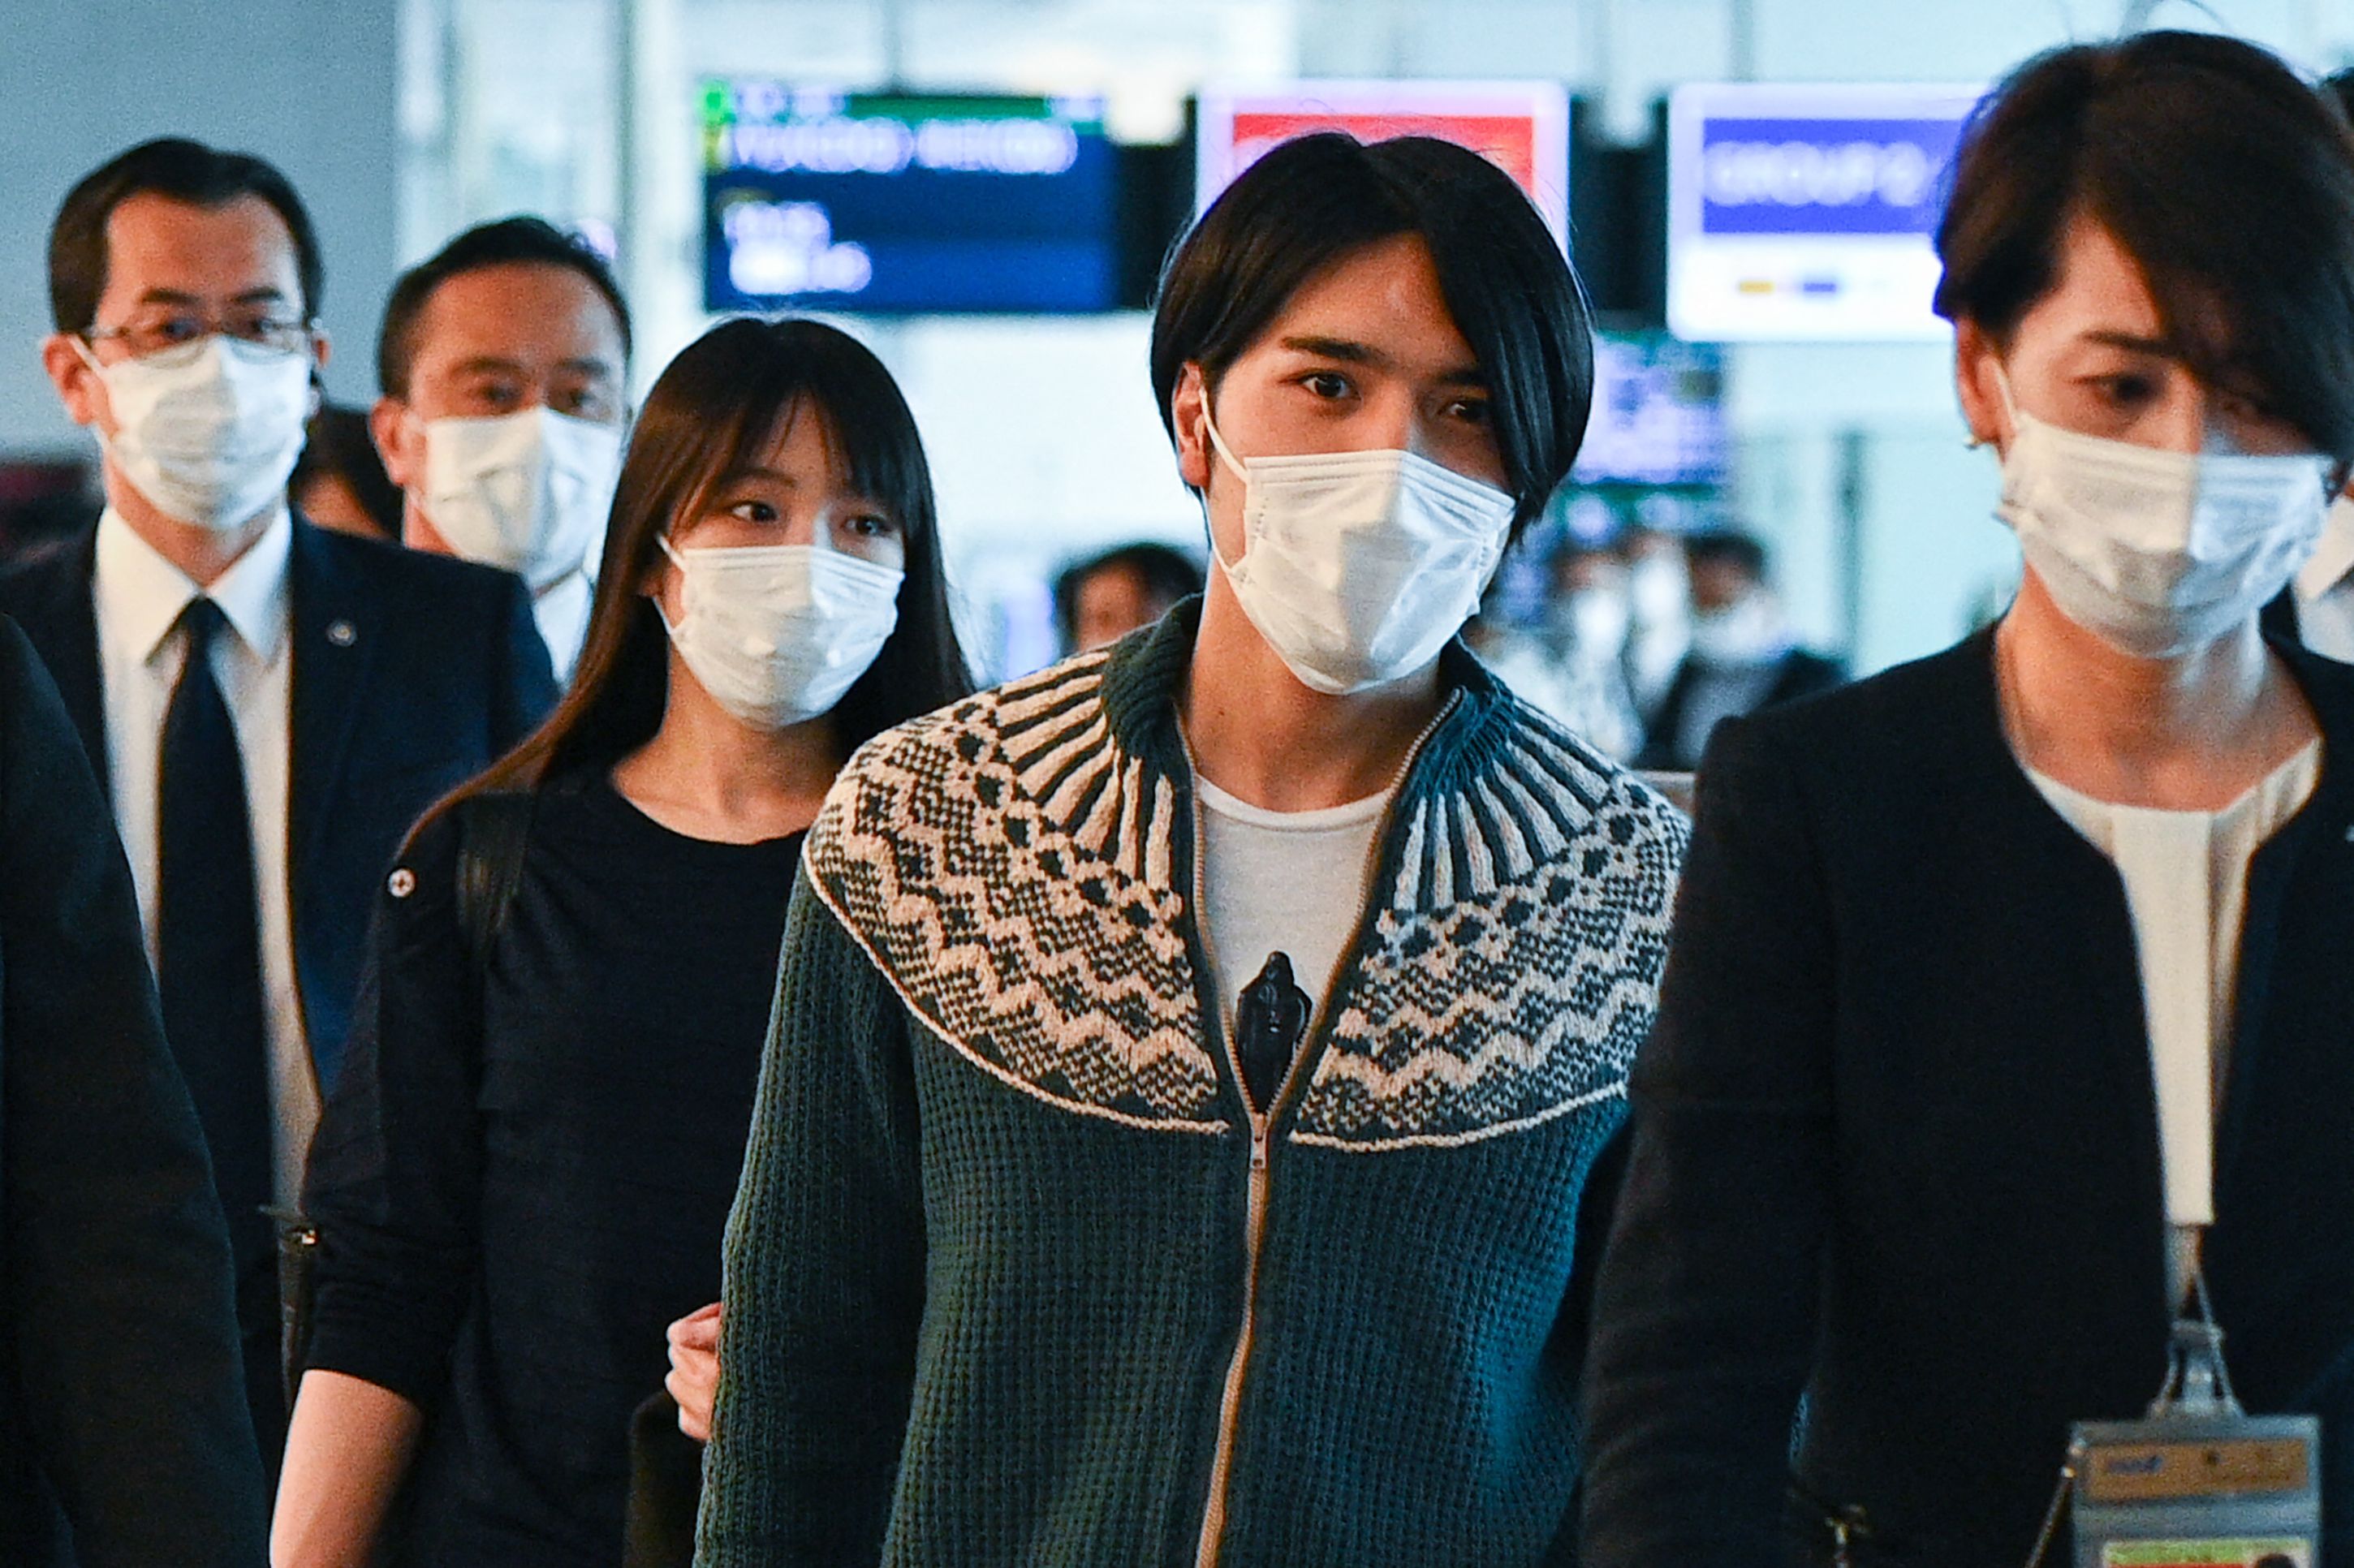 Japan’s former princess Mako Komuro and her husband Kei Komuro (second from right) walk to the departure gate for their flight to New York